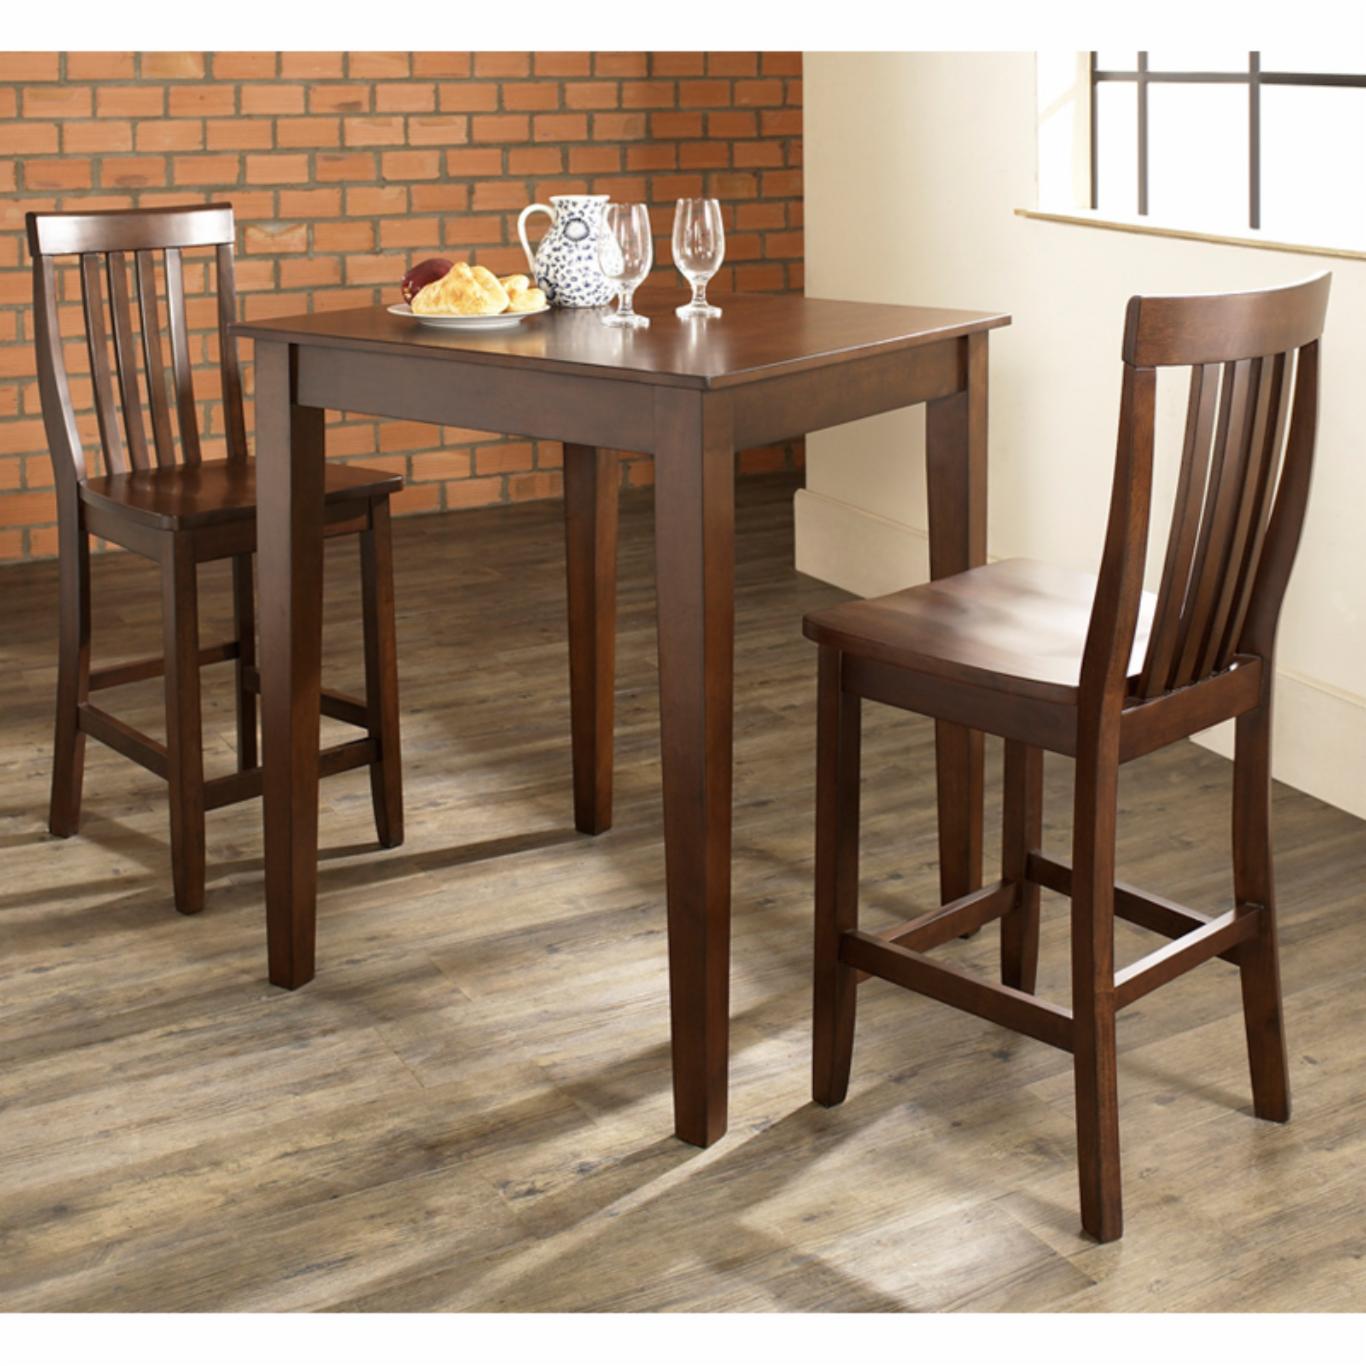 Bar Table Set: 3-Piece Pub Dining Set with Tapered Leg